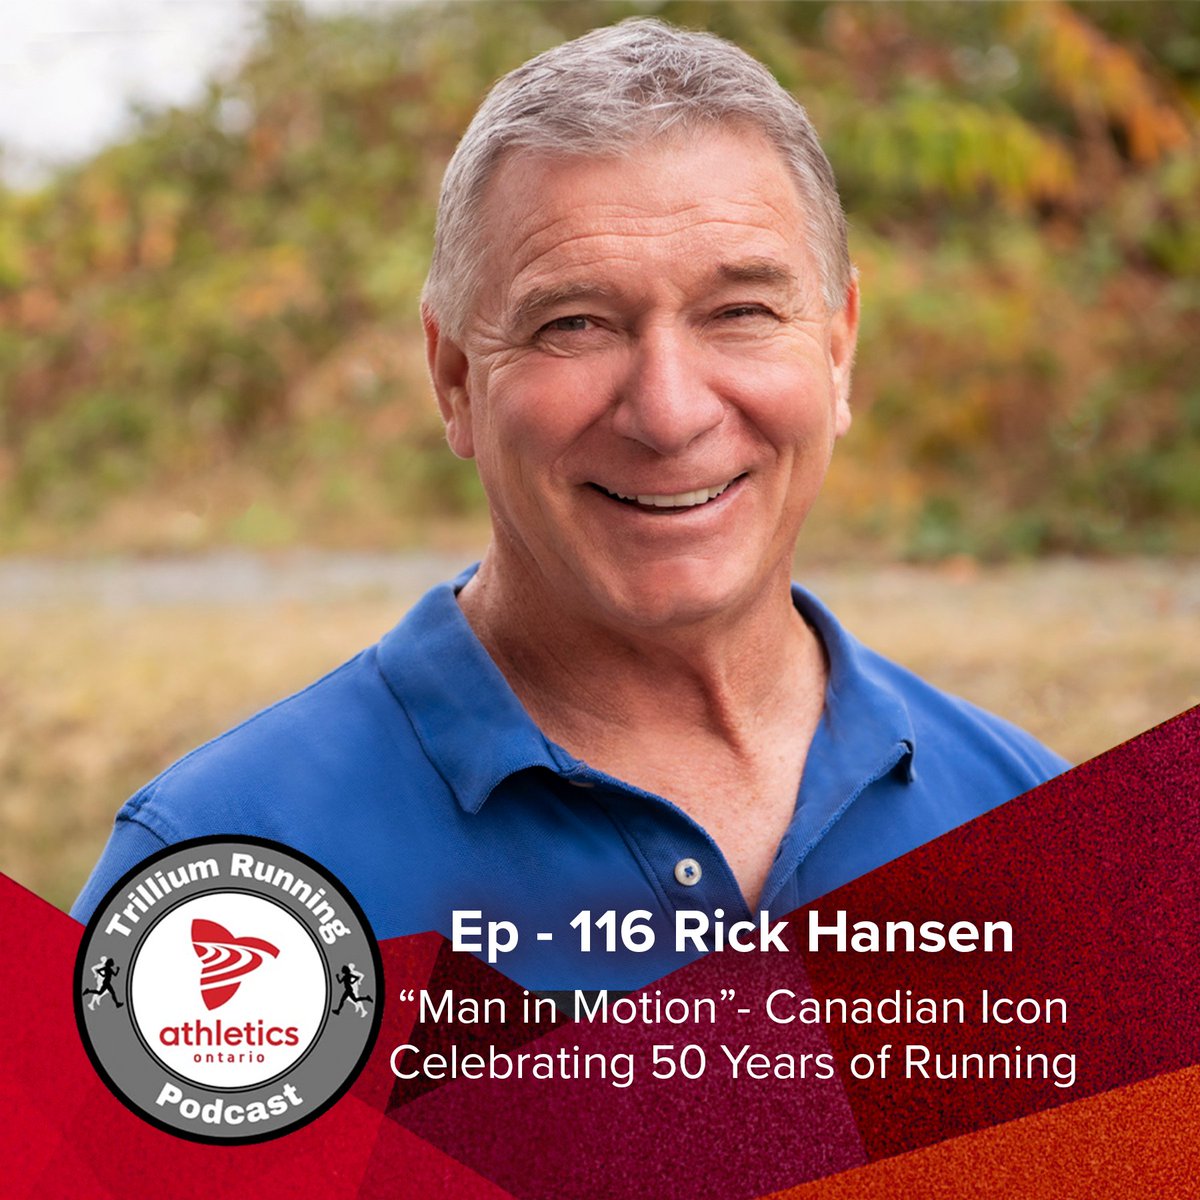 The Trillium Running Podcast celebrate the 50th anniversary of Tamarack Ottawa Race Weekend with the icon, the legend, the 'Man in Motion' himself...Rick Hansen! Listen here: athleticsontario.ca/road-trail-run…